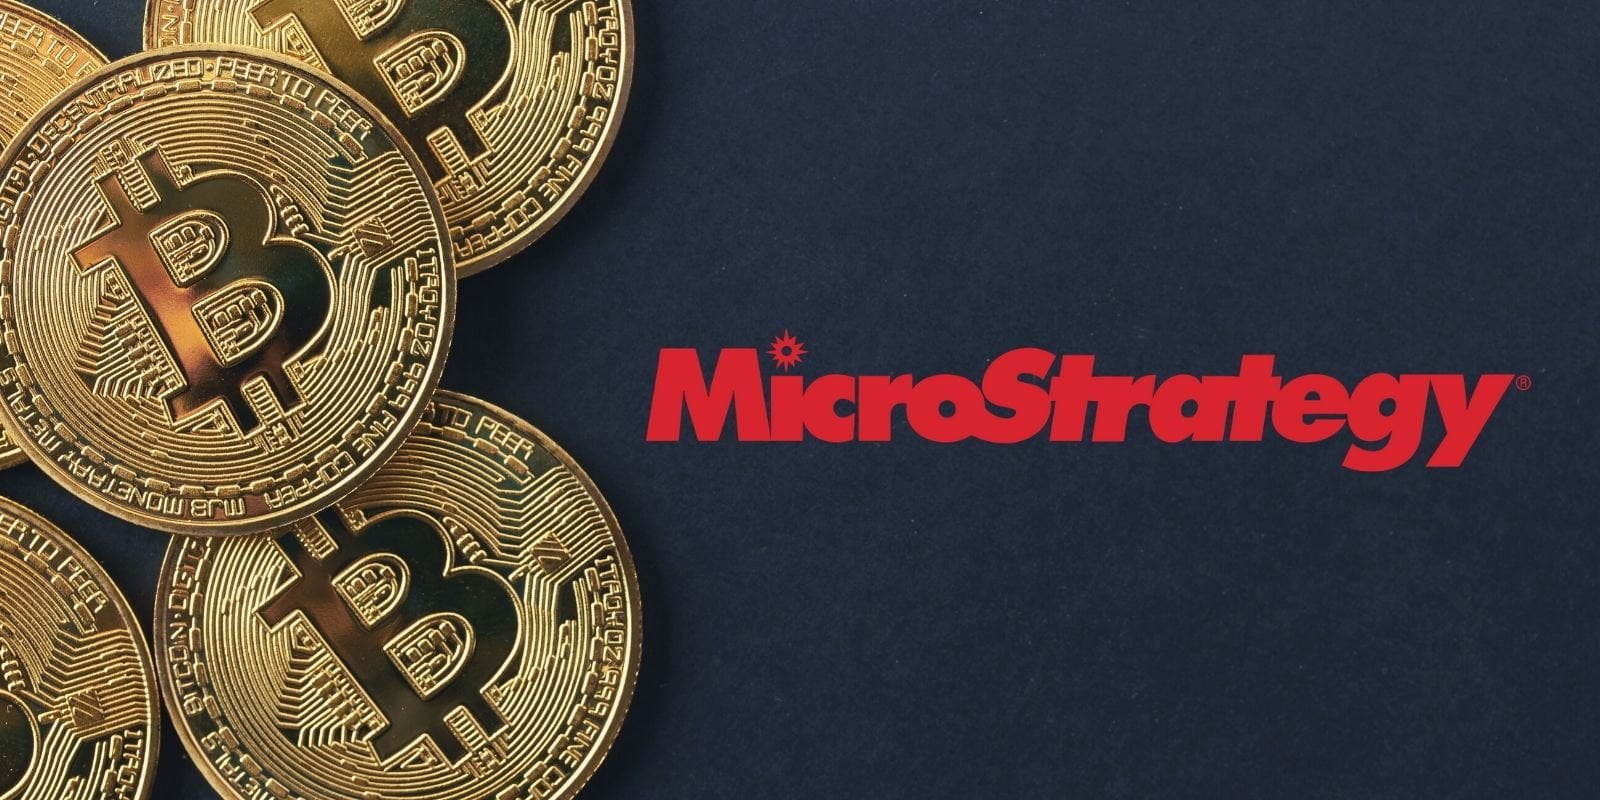 Microstrategy implementation rumors revealed "undercover" Bitcoin (BTC) - How true is this story?